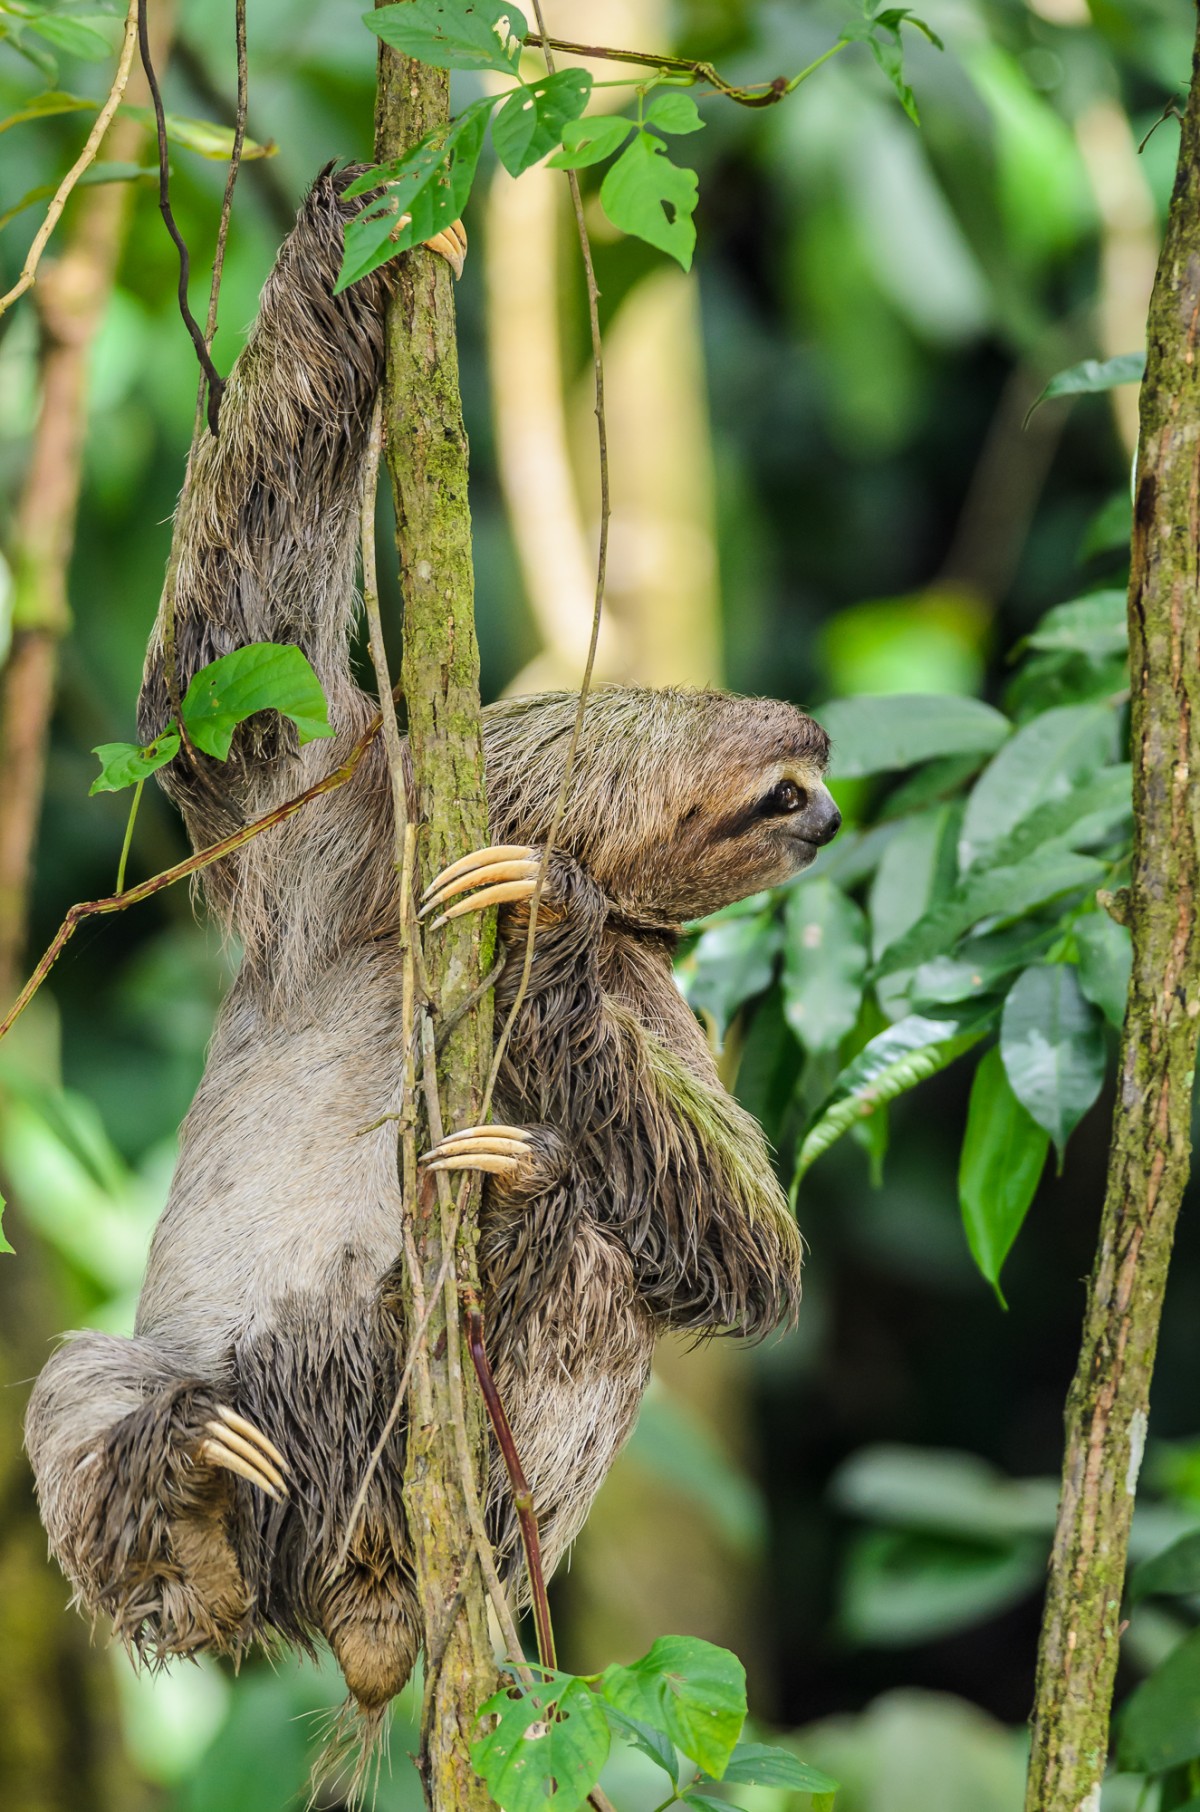 Brown-throated sloth (Bradypus variegatus) climbing in a tree in the rainforest of Costa Rica.